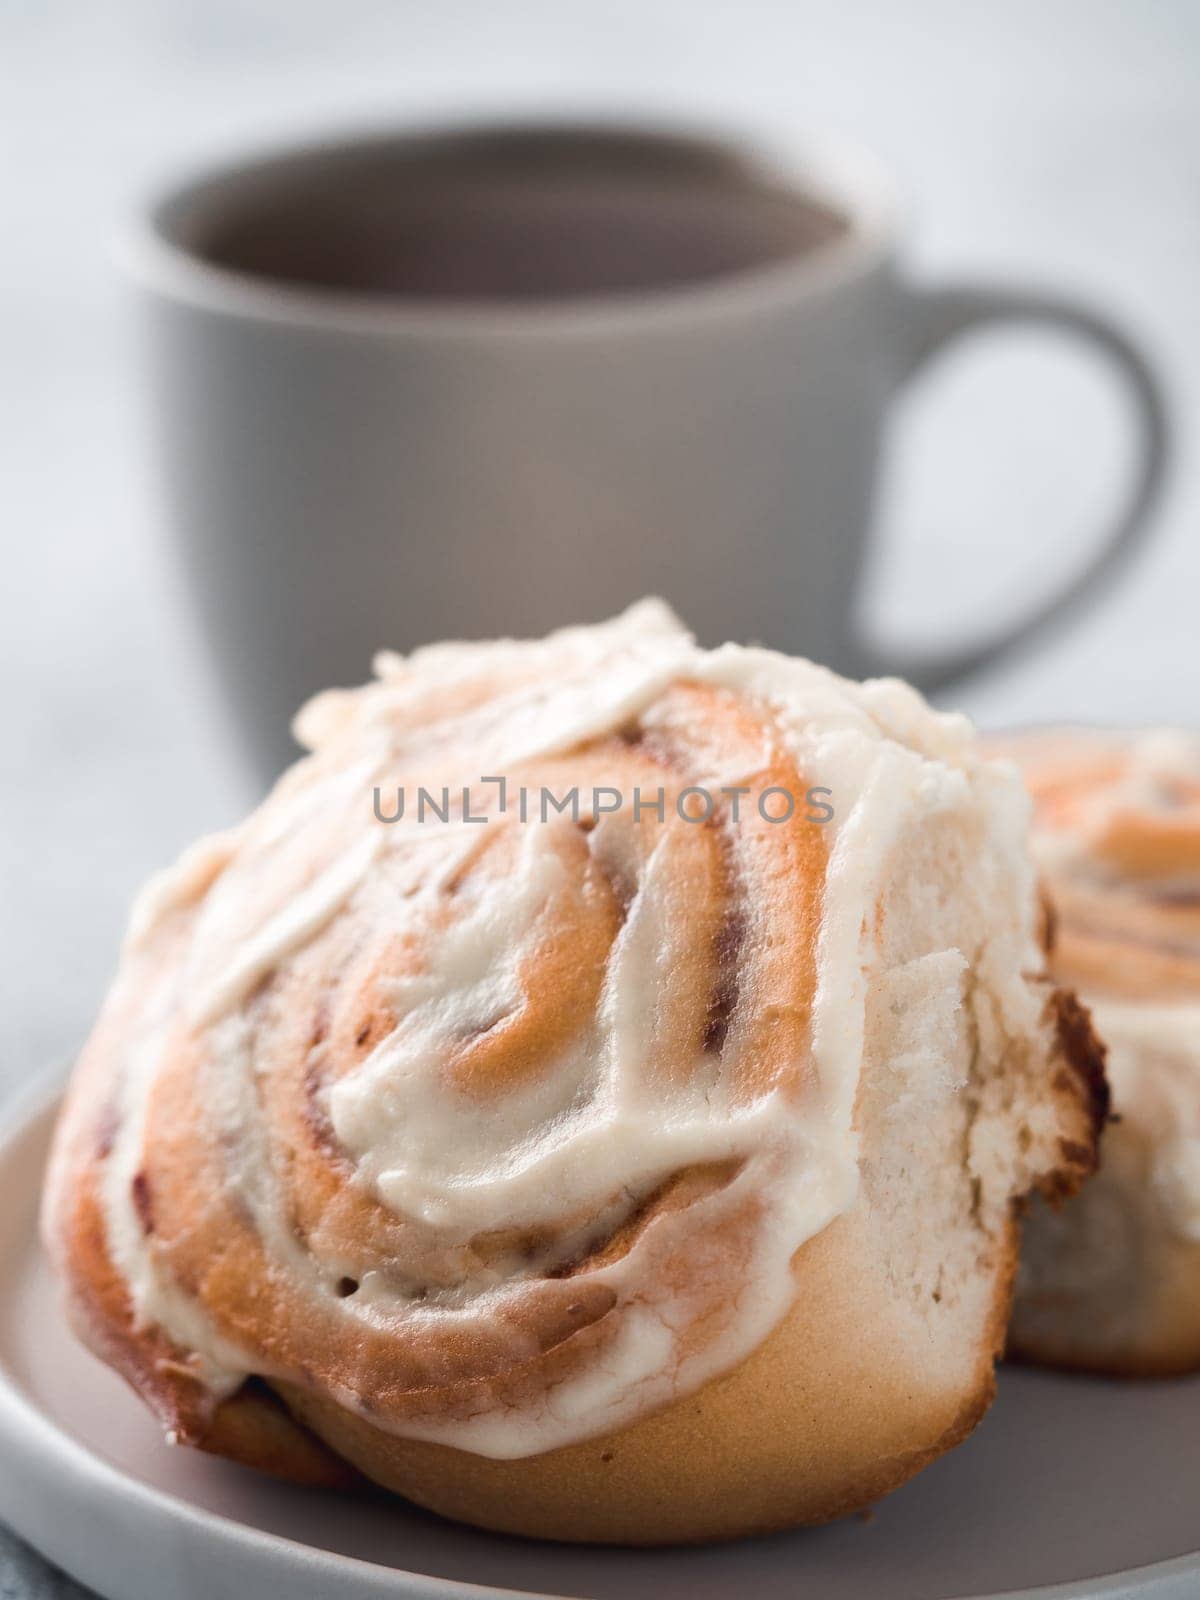 Vegan cinnamon rolls with topping, top view by fascinadora